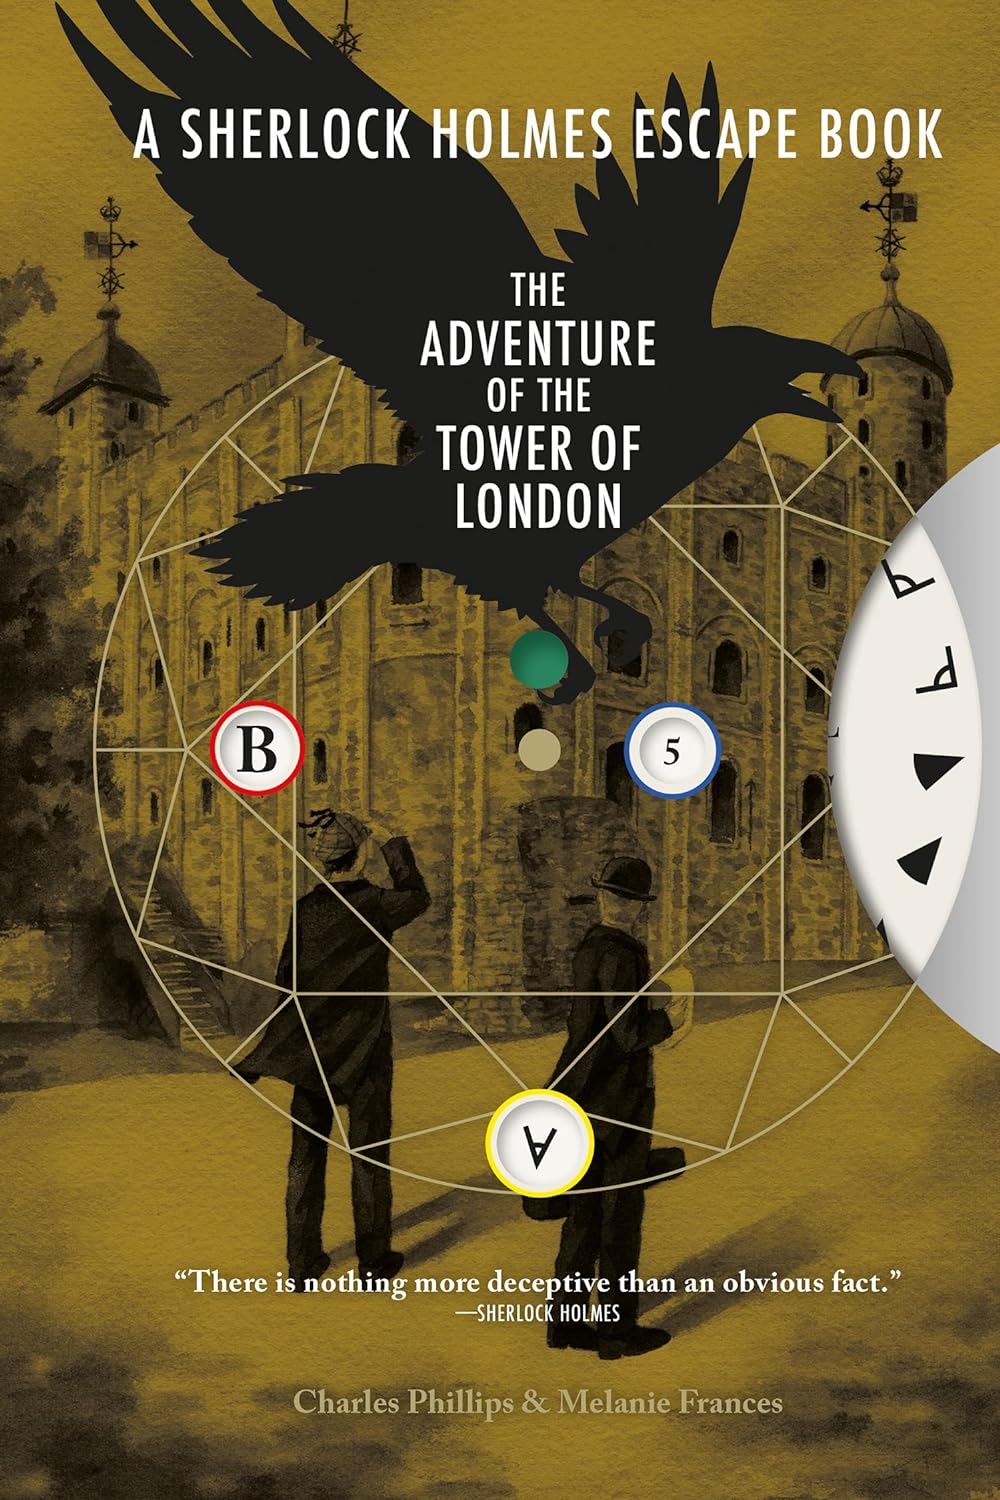 Sherlock Holmes Escape Book - Adventure of the Tower of London